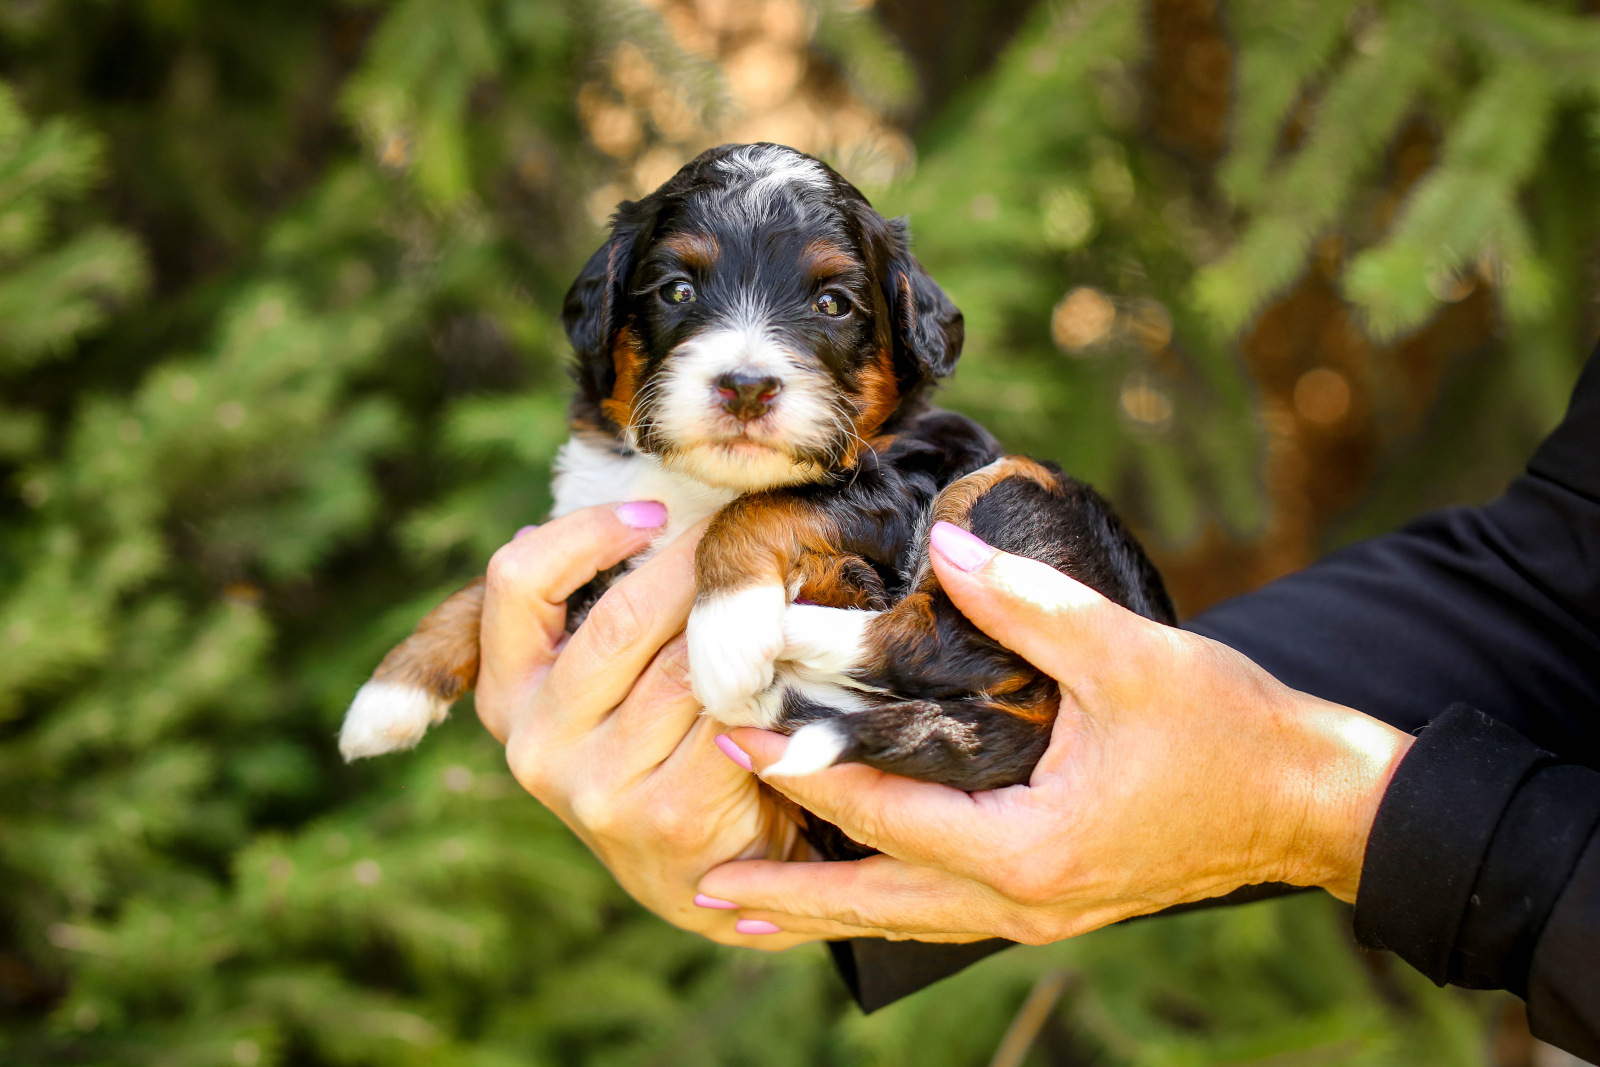 A puppy being held